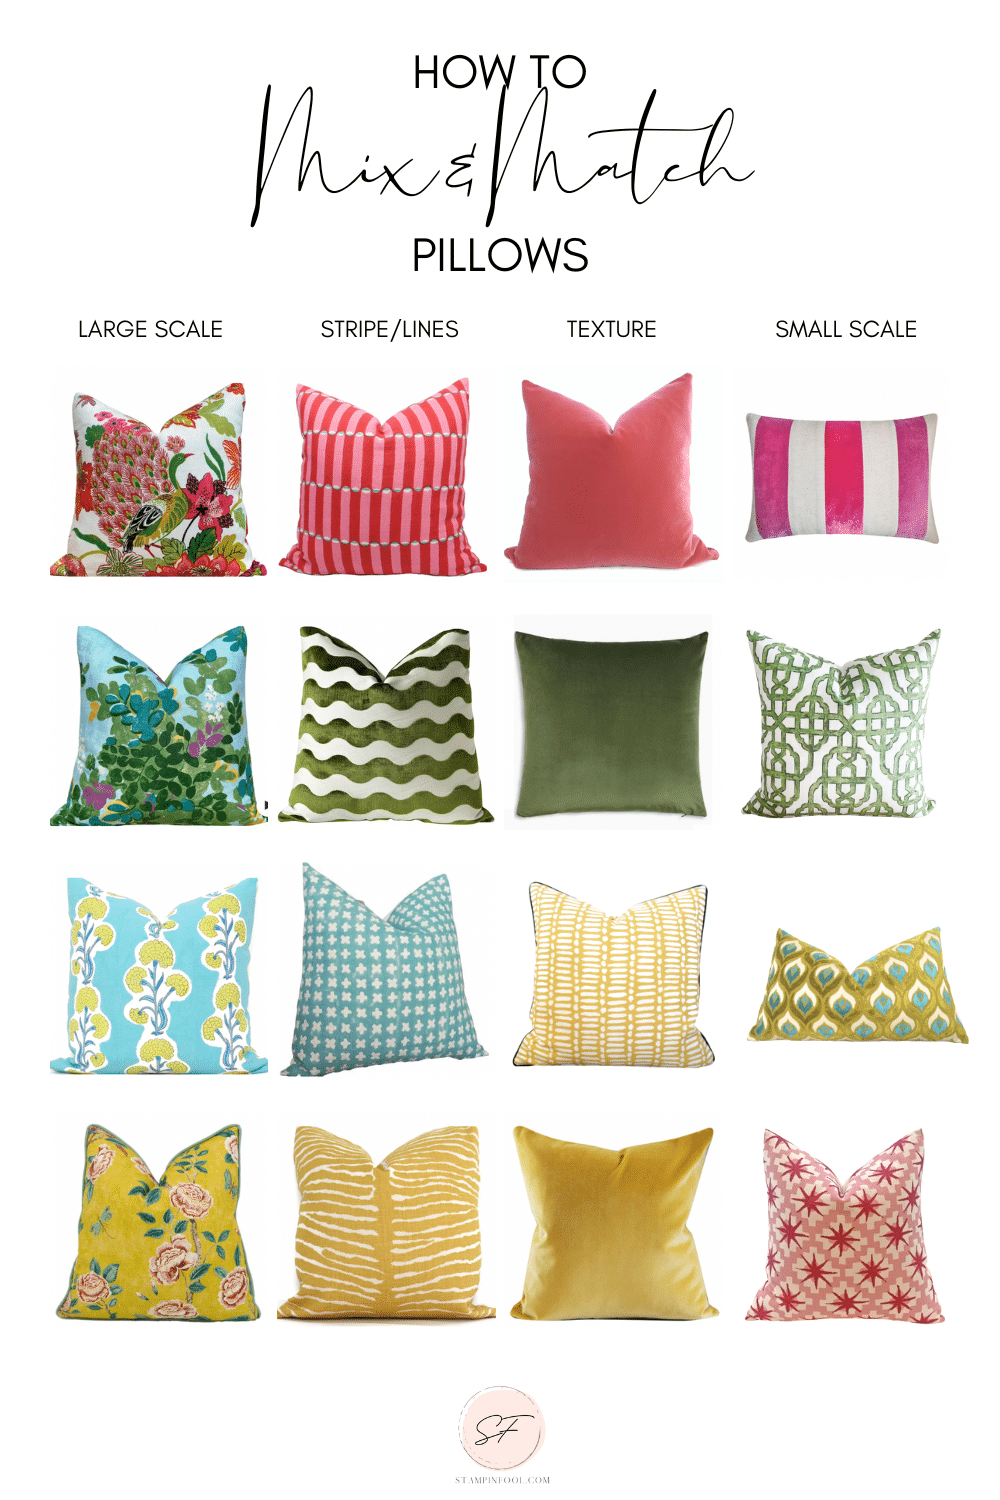 How to Mix and Match Pillows floral
